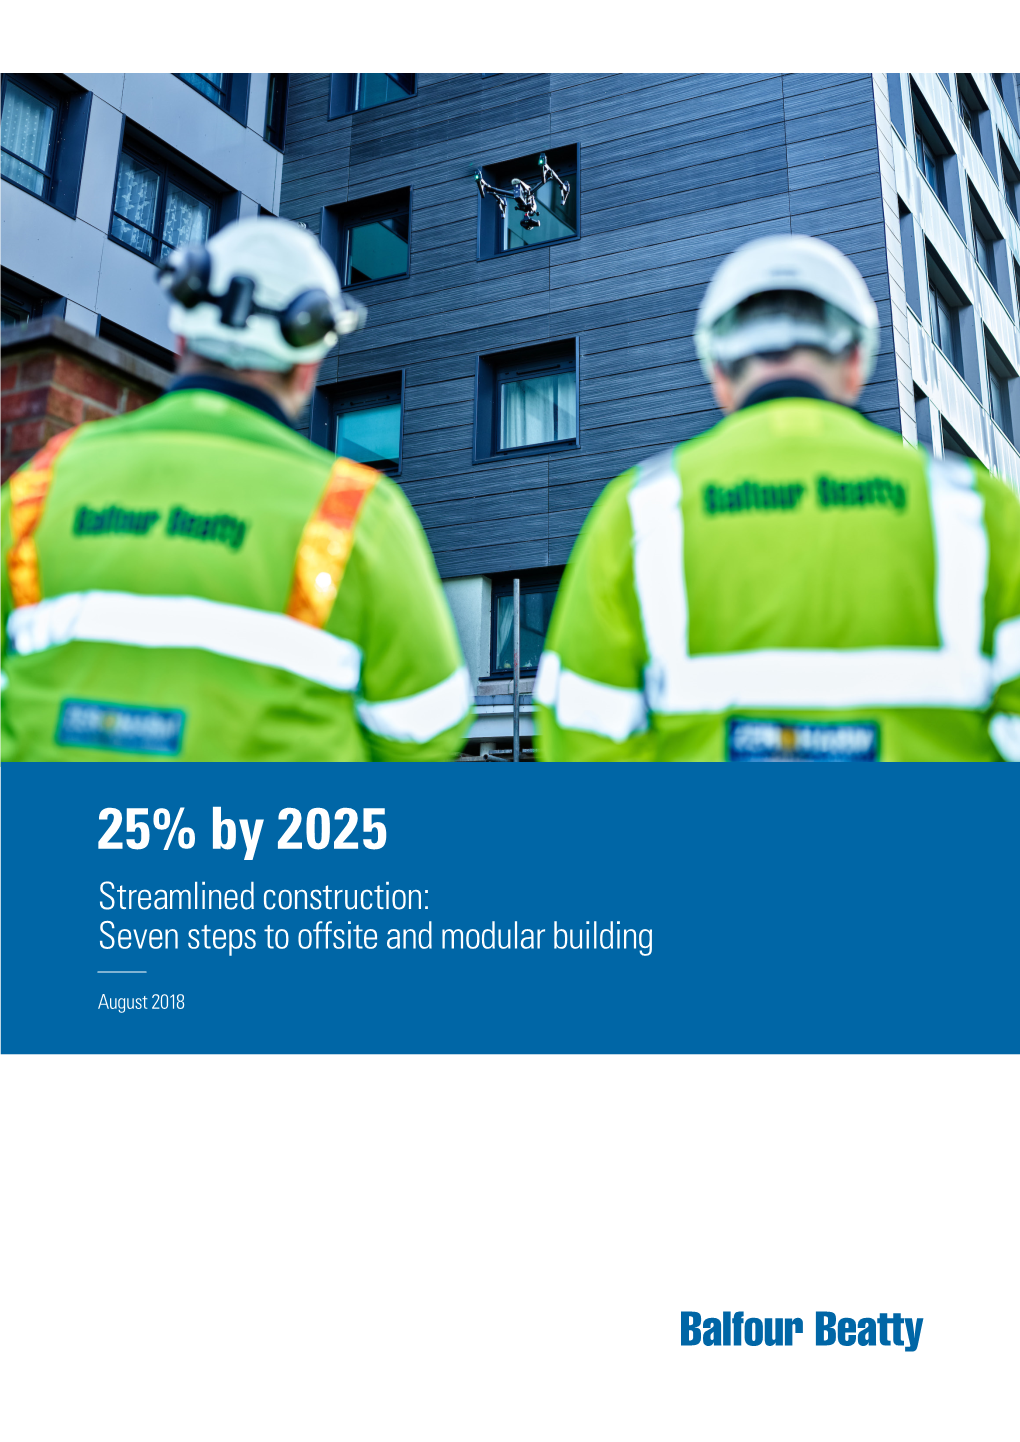 25% by 2025 Streamlined Construction: Seven Steps to Offsite and Modular Building